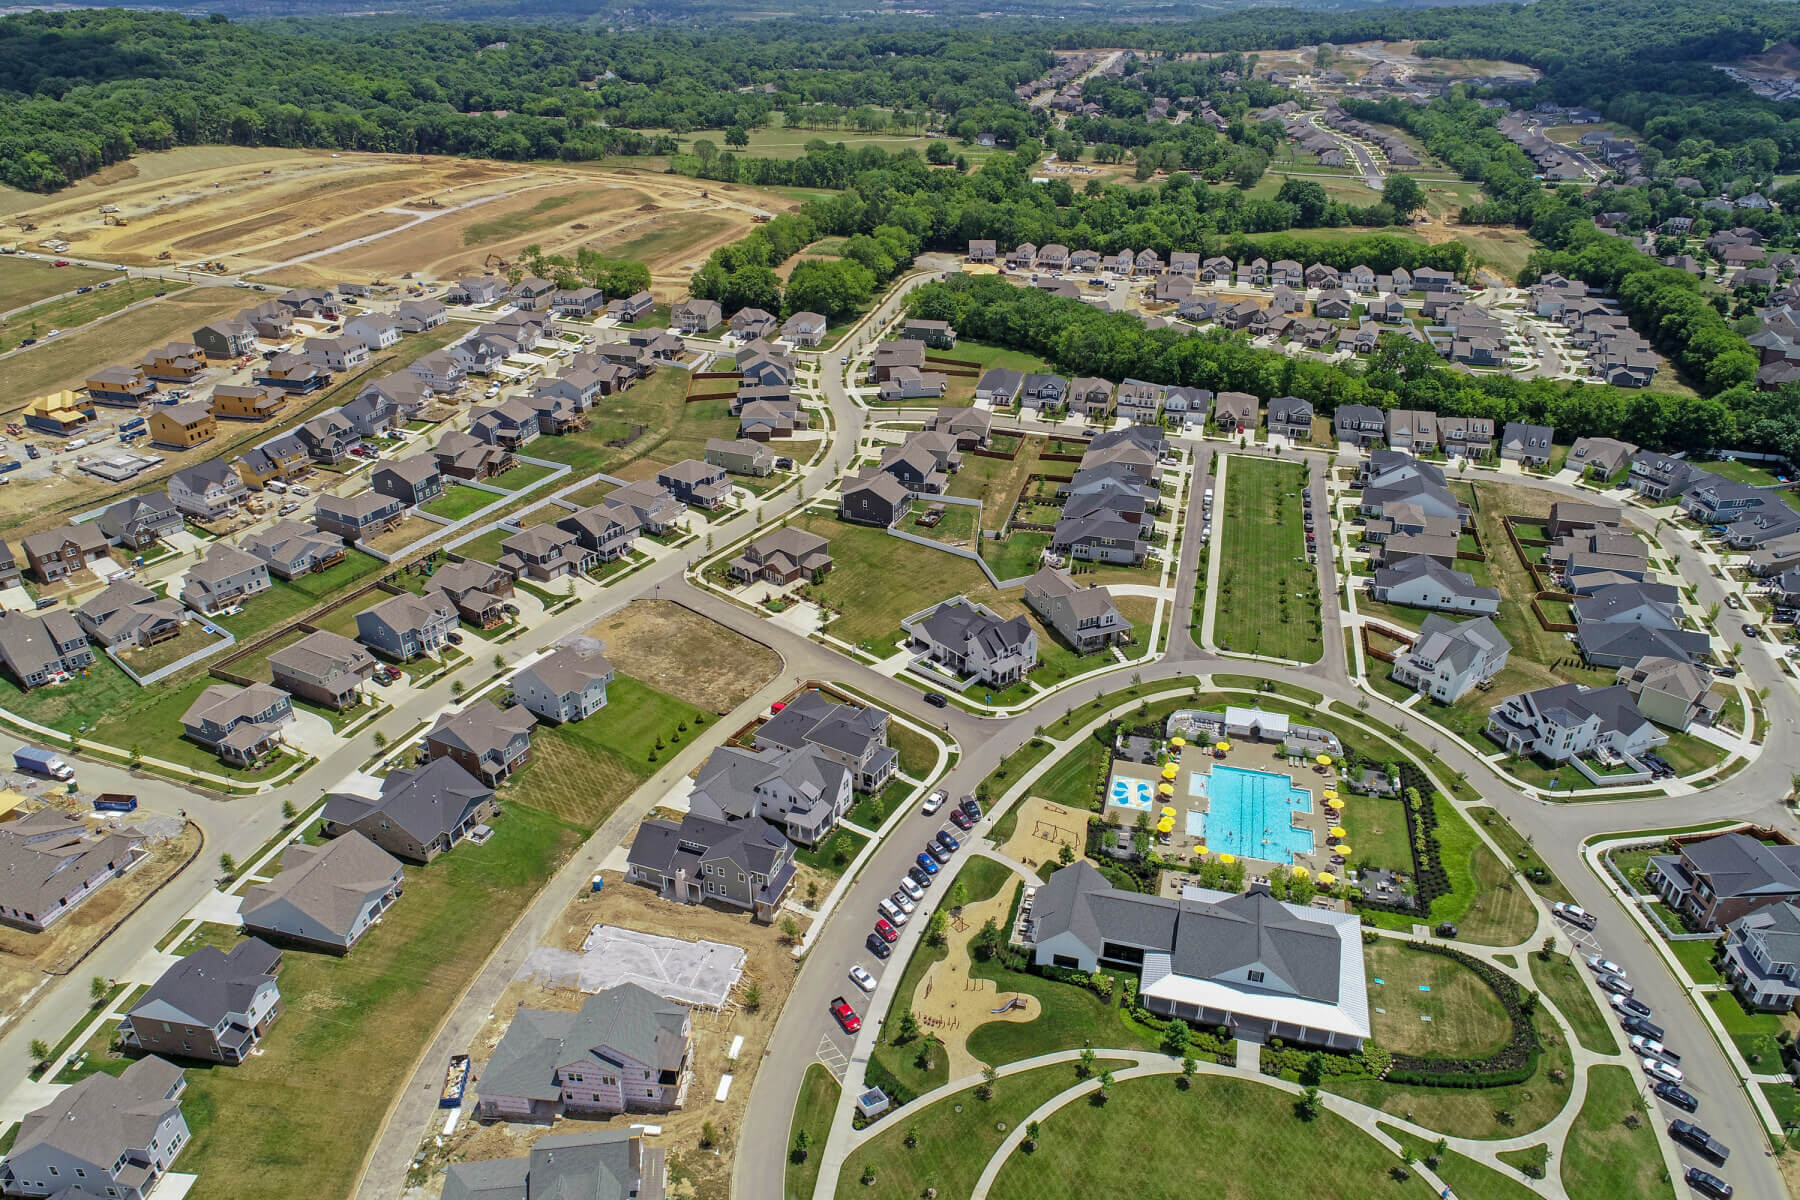 a drone shot showing the entire Durham Farms development with rows of houses